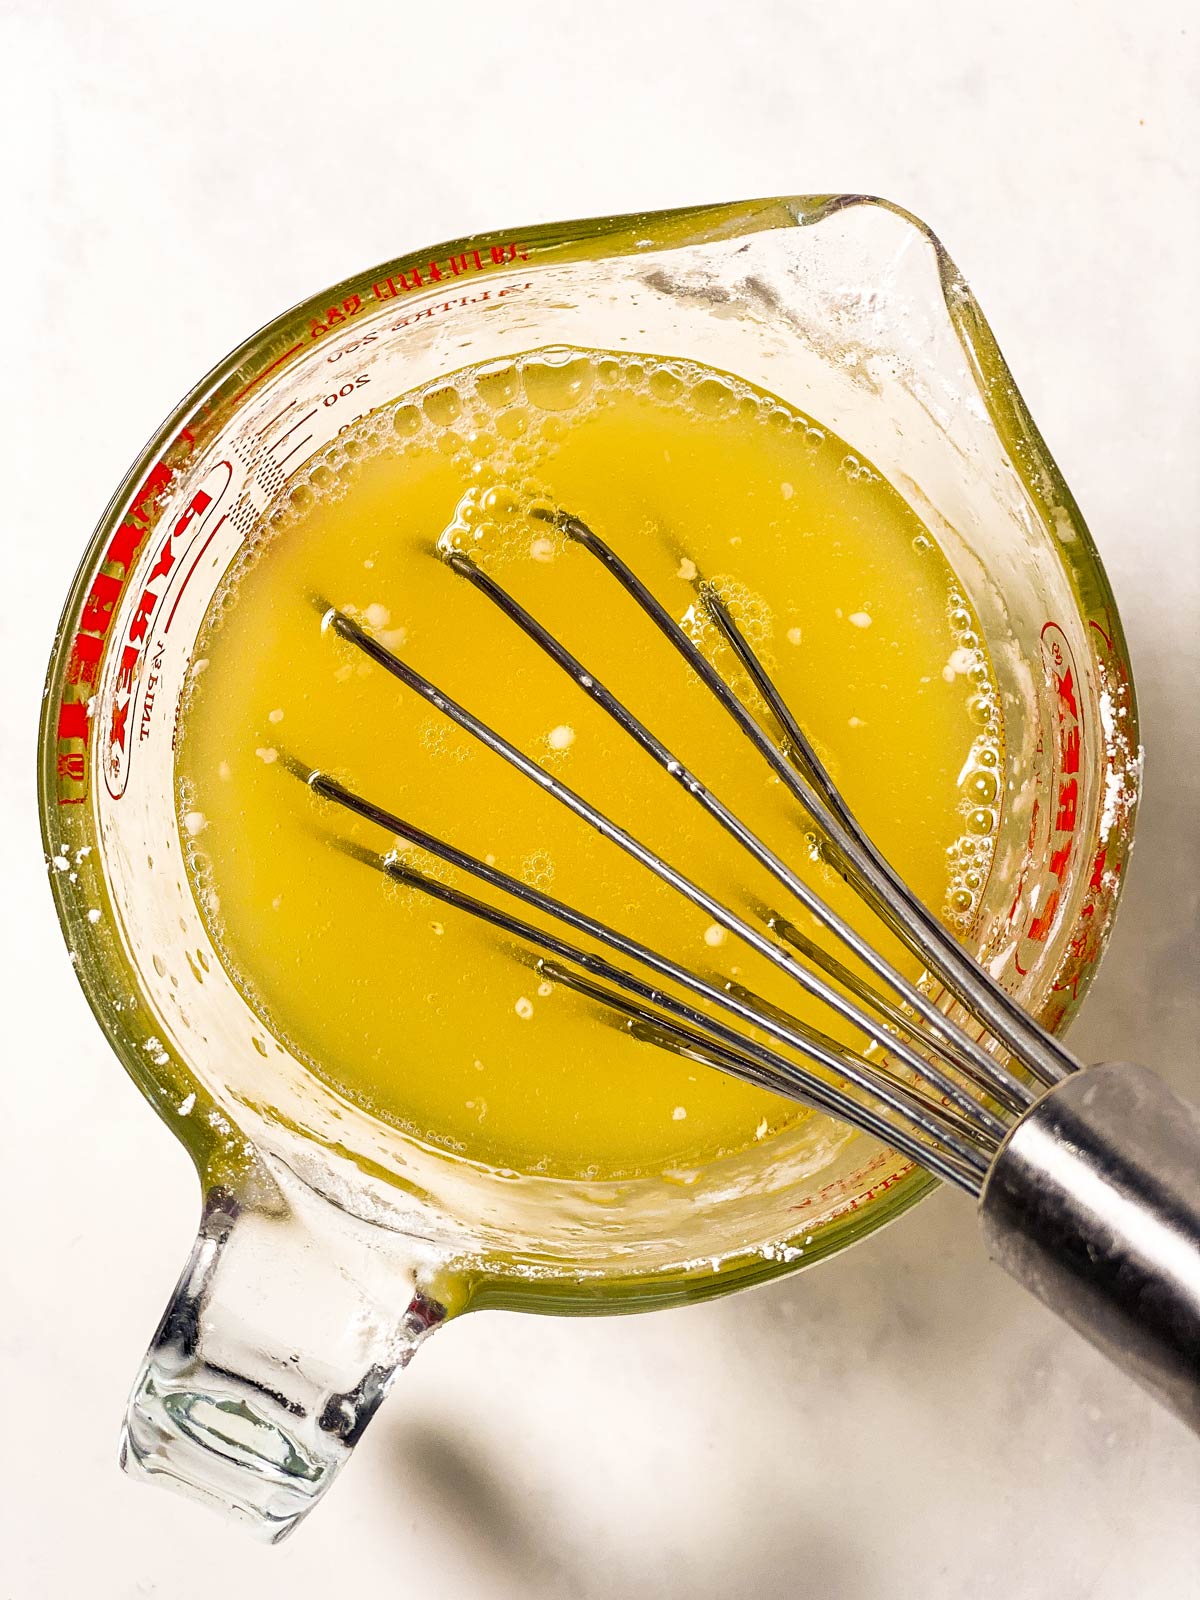 lemon drizzle syrup in small glass measuring jug with whisk